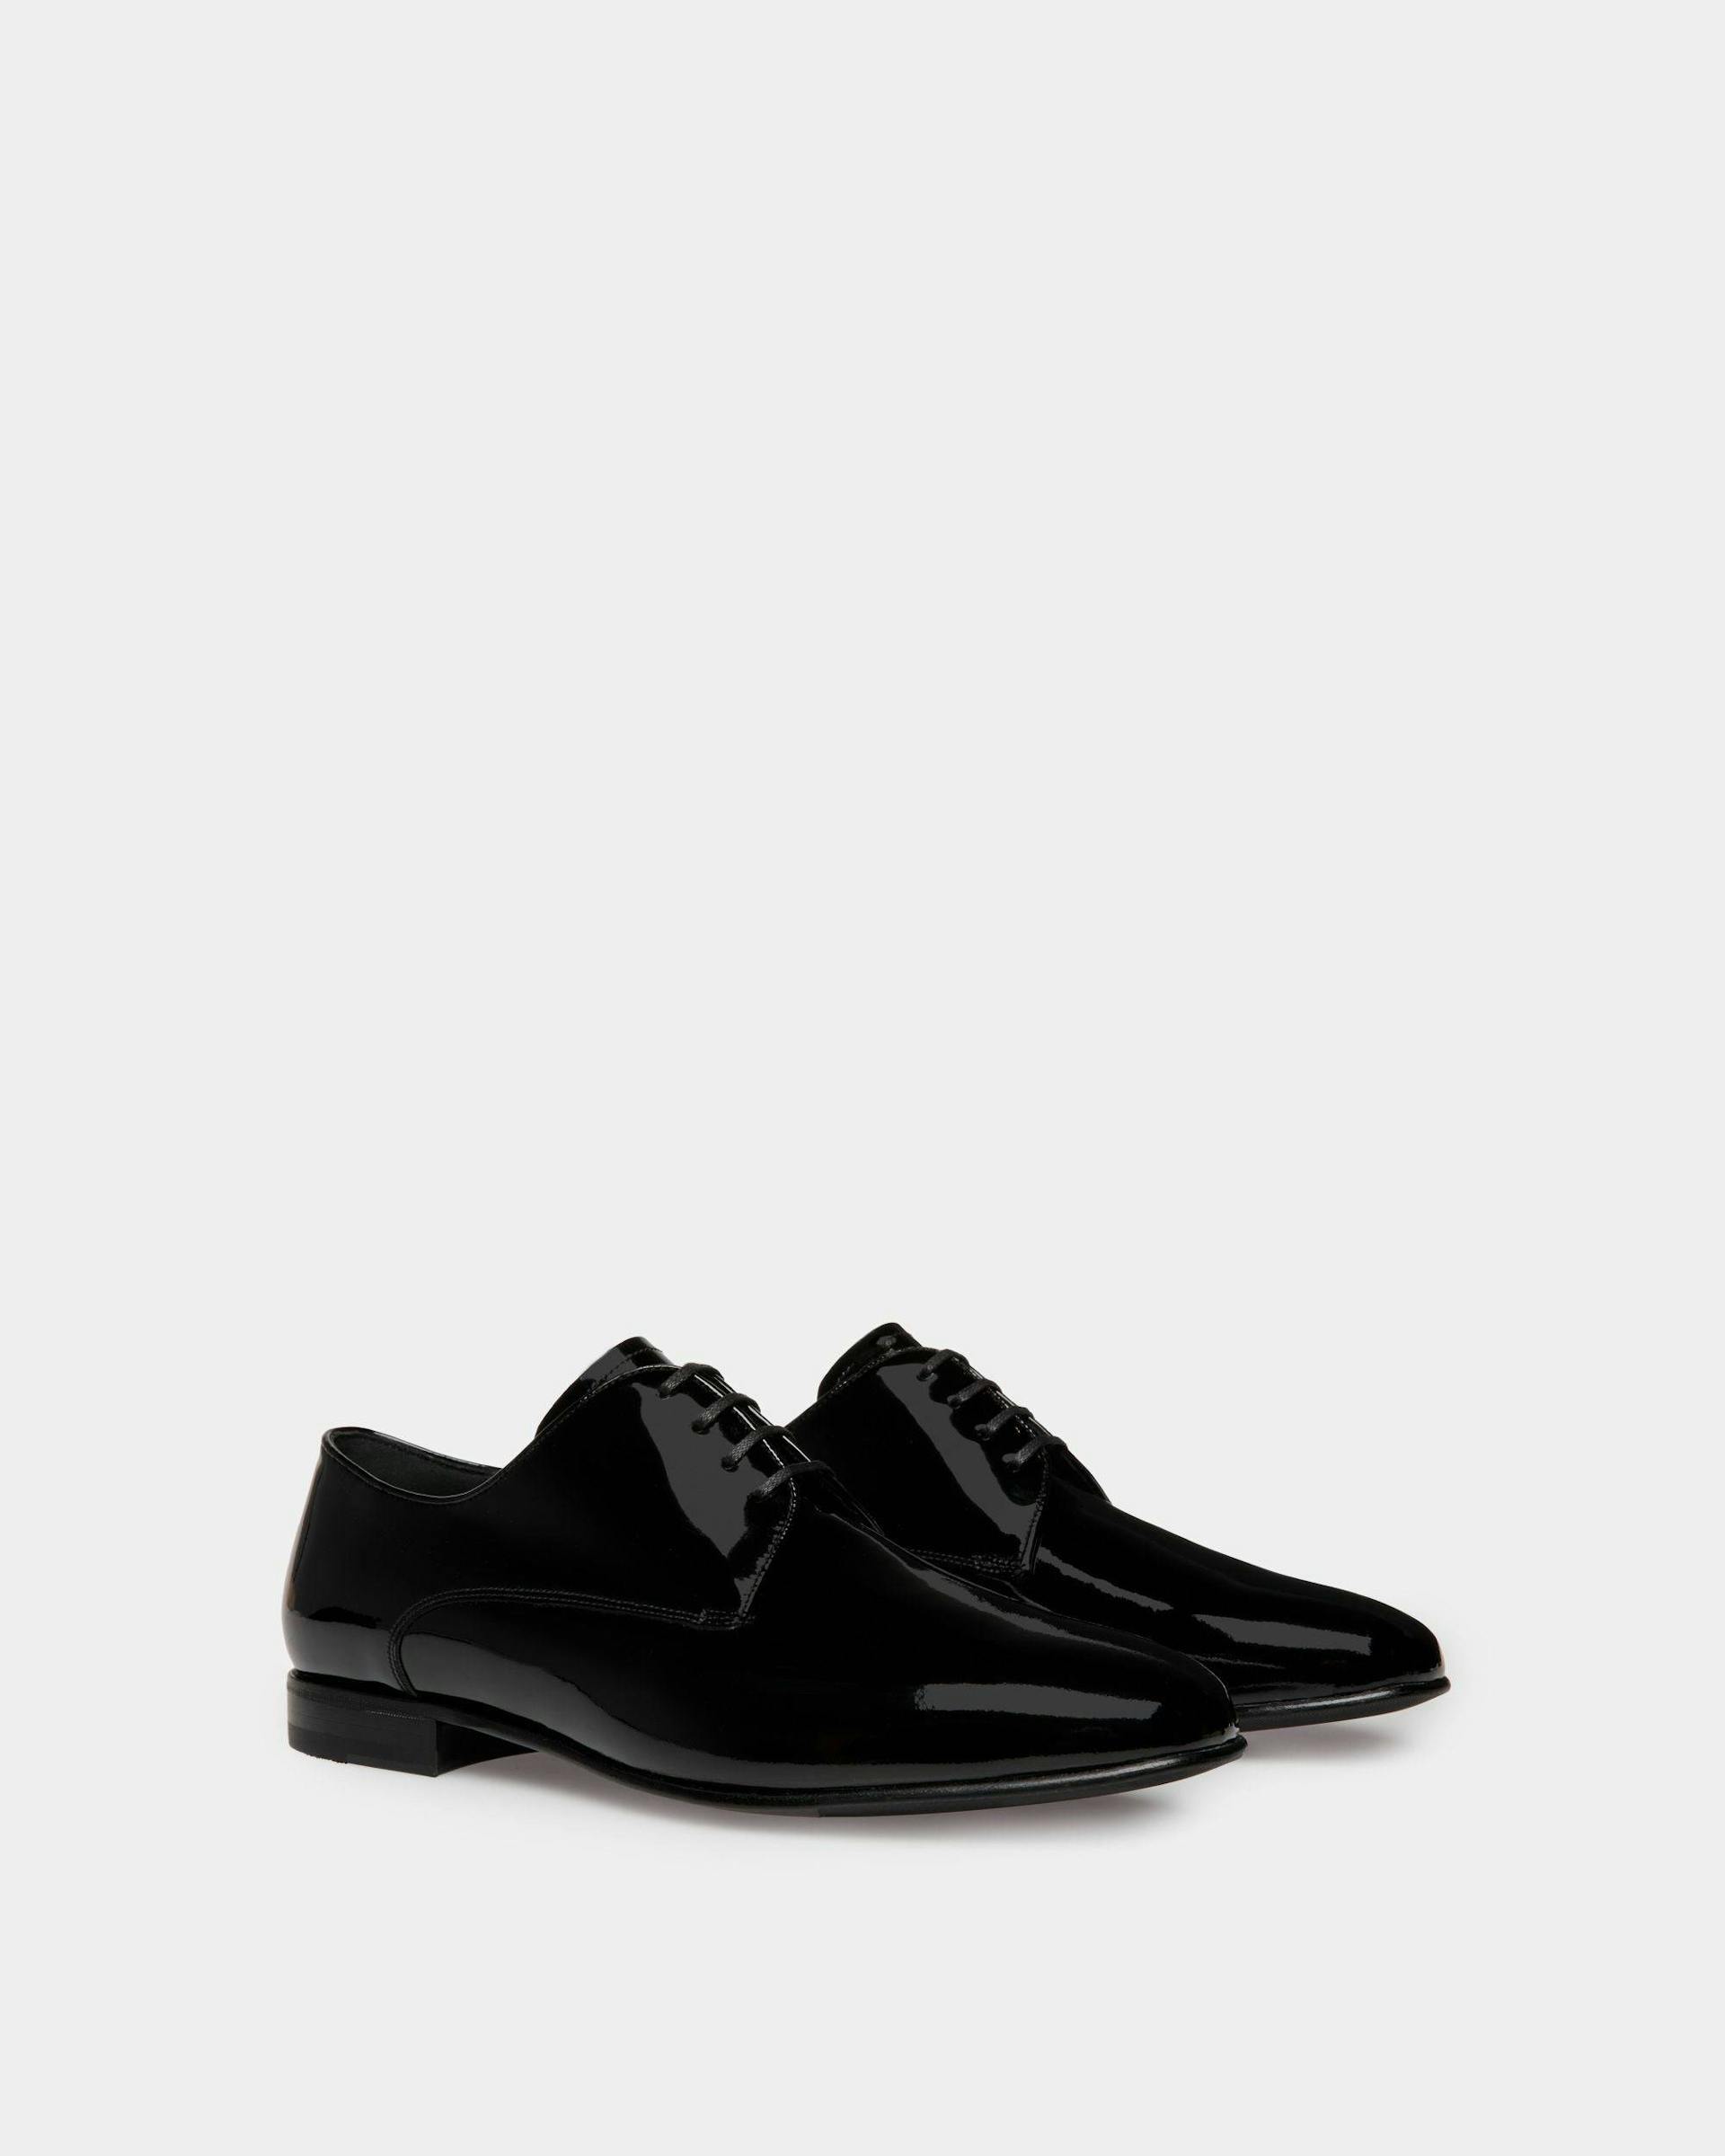 Suisse Derby in Black Patent Leather - Men's - Bally - 02